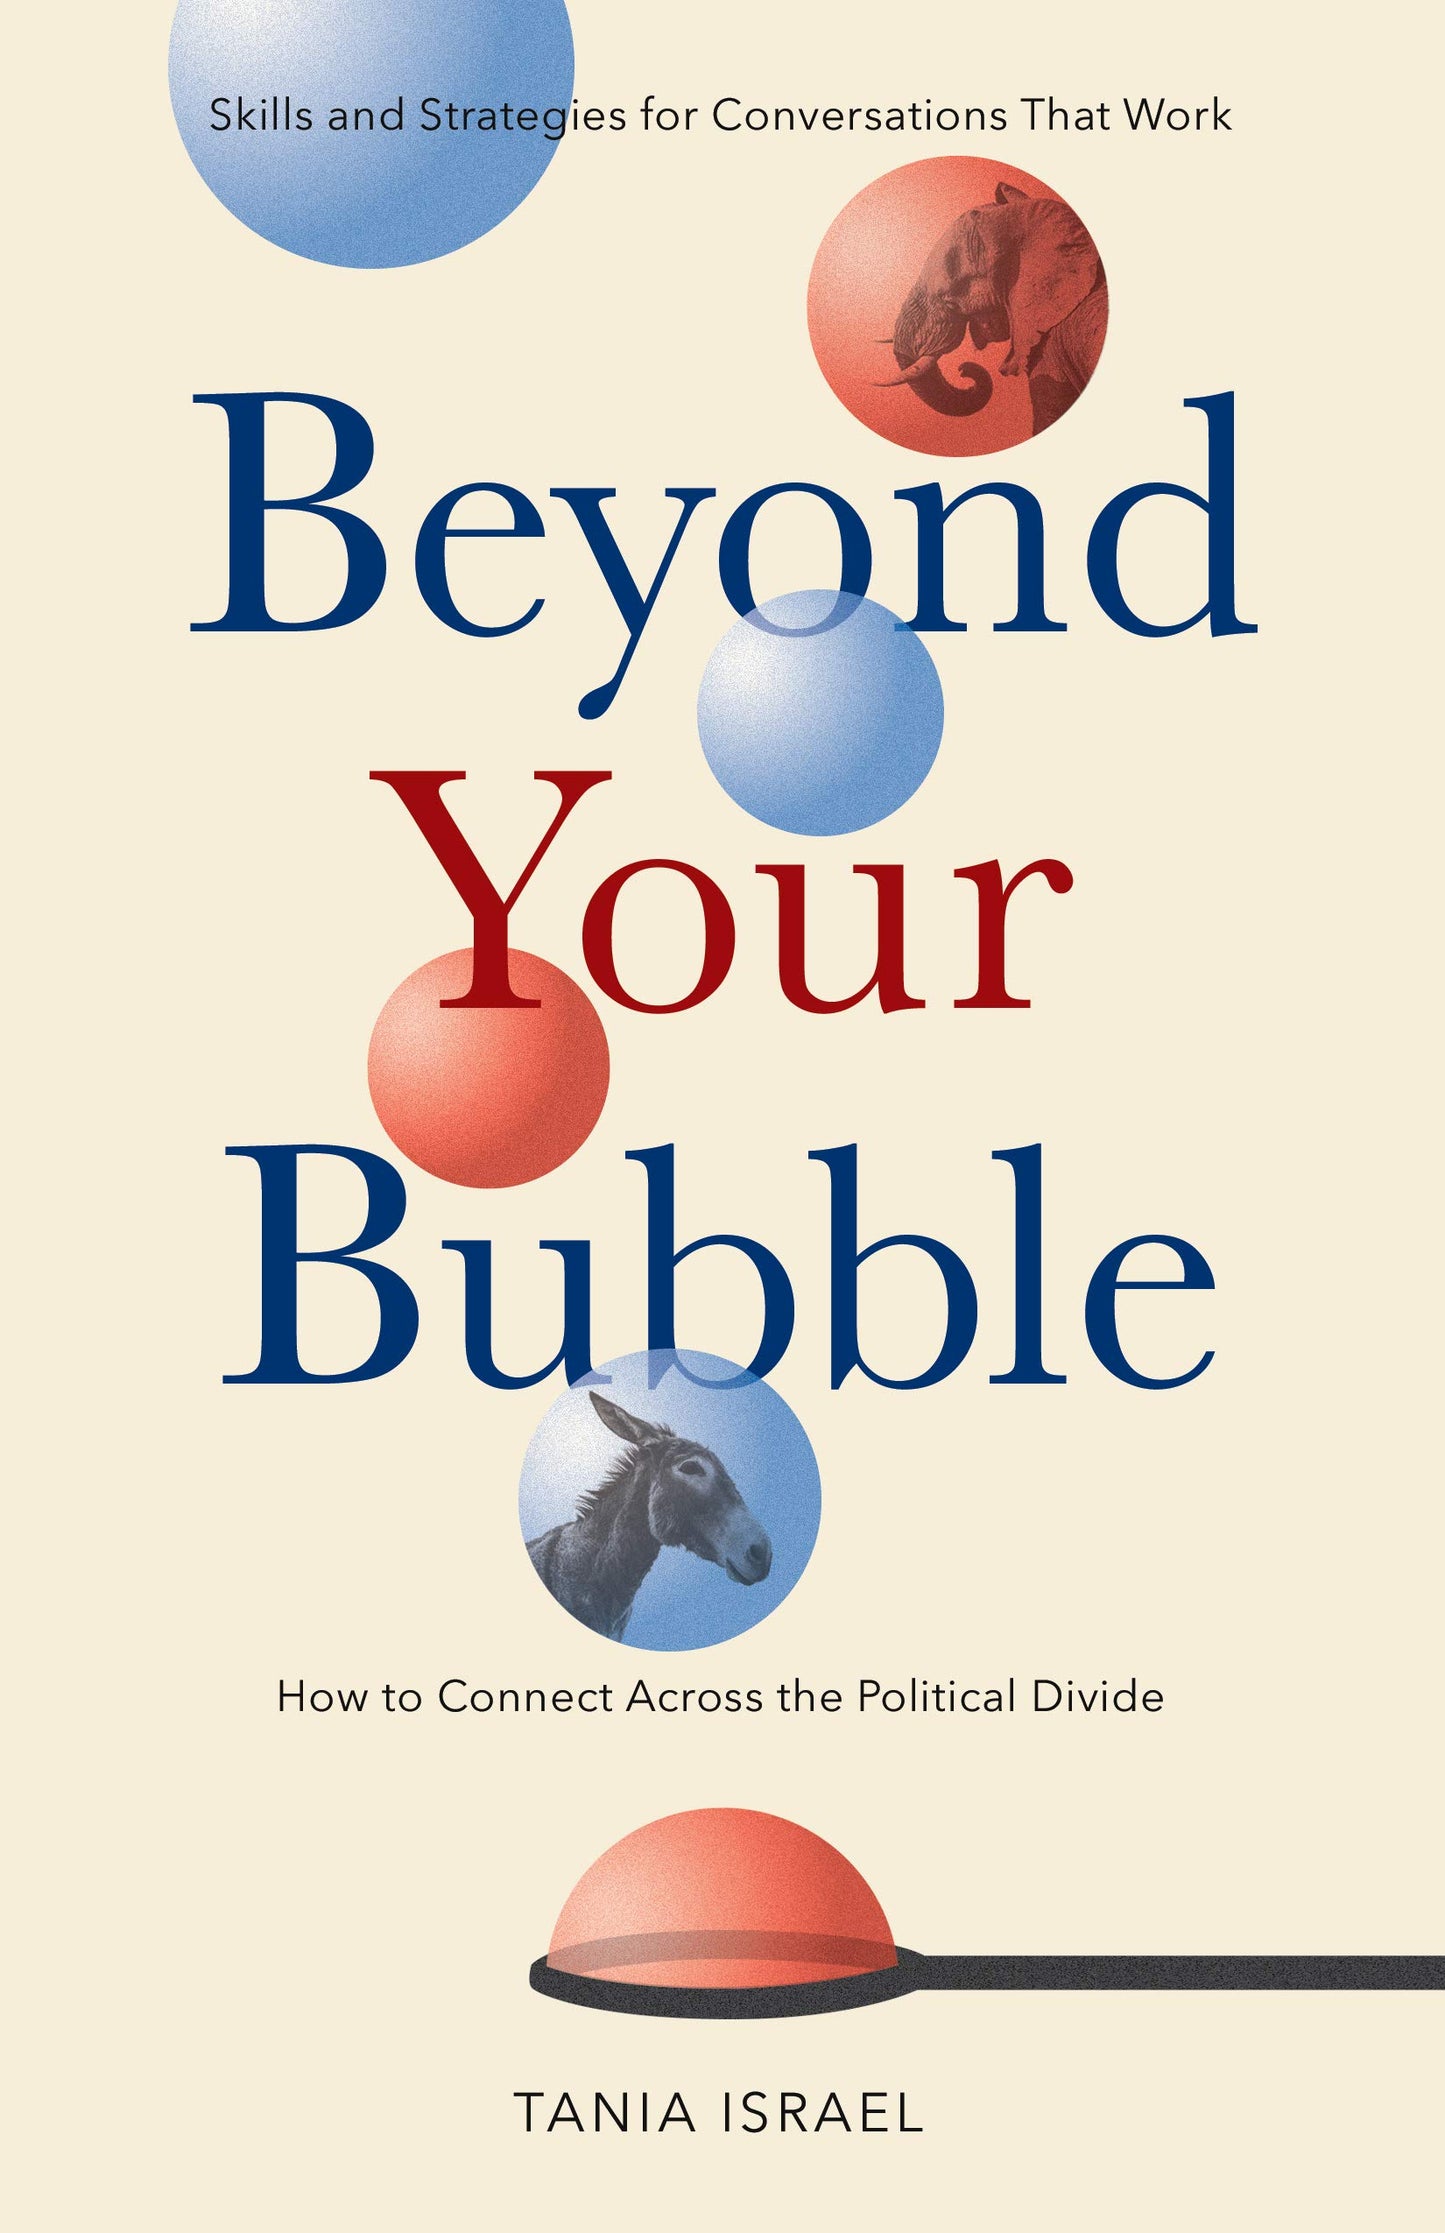 Beyond Your Bubble // How to Connect Across the Political Divide, Skills and Strategies for Conversations That Work